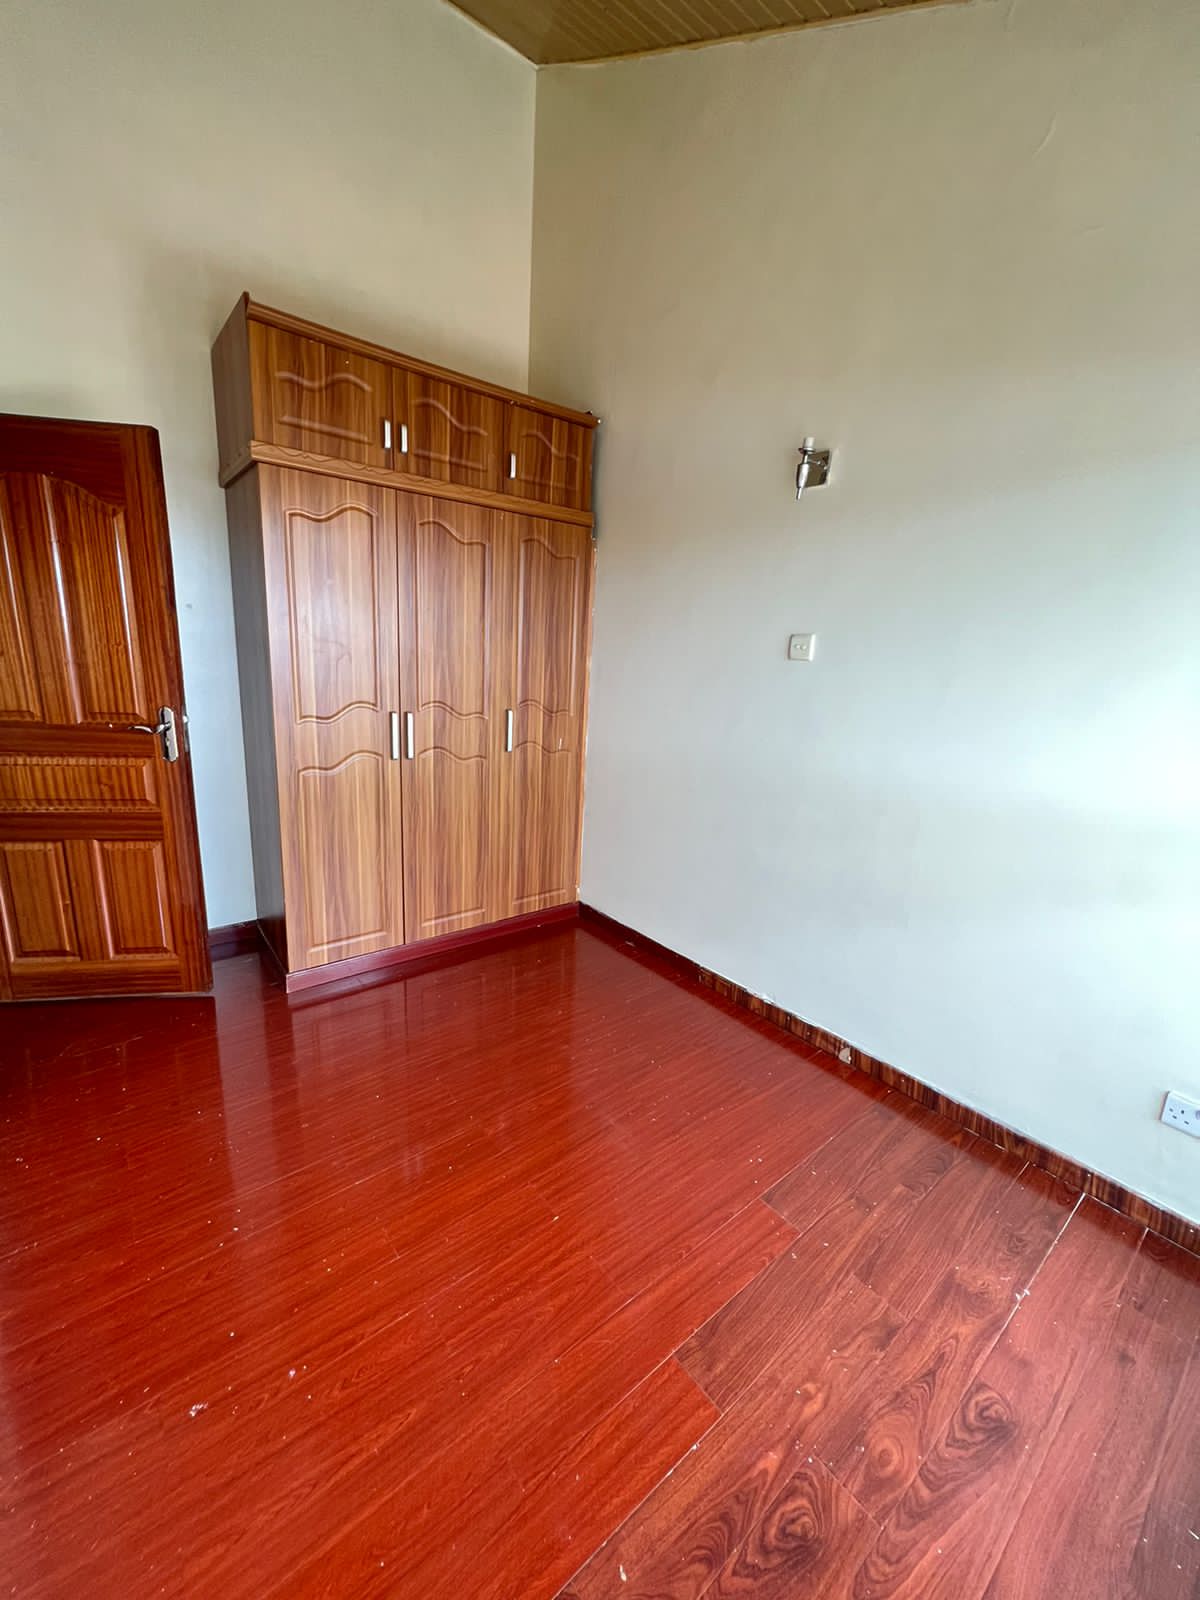 Spacious modern 2 bedroom apartment to let in kilimani, Nairobi. Has Backup generator, Few units in the compound. ASKING PRICE 55K. Musilli Homes